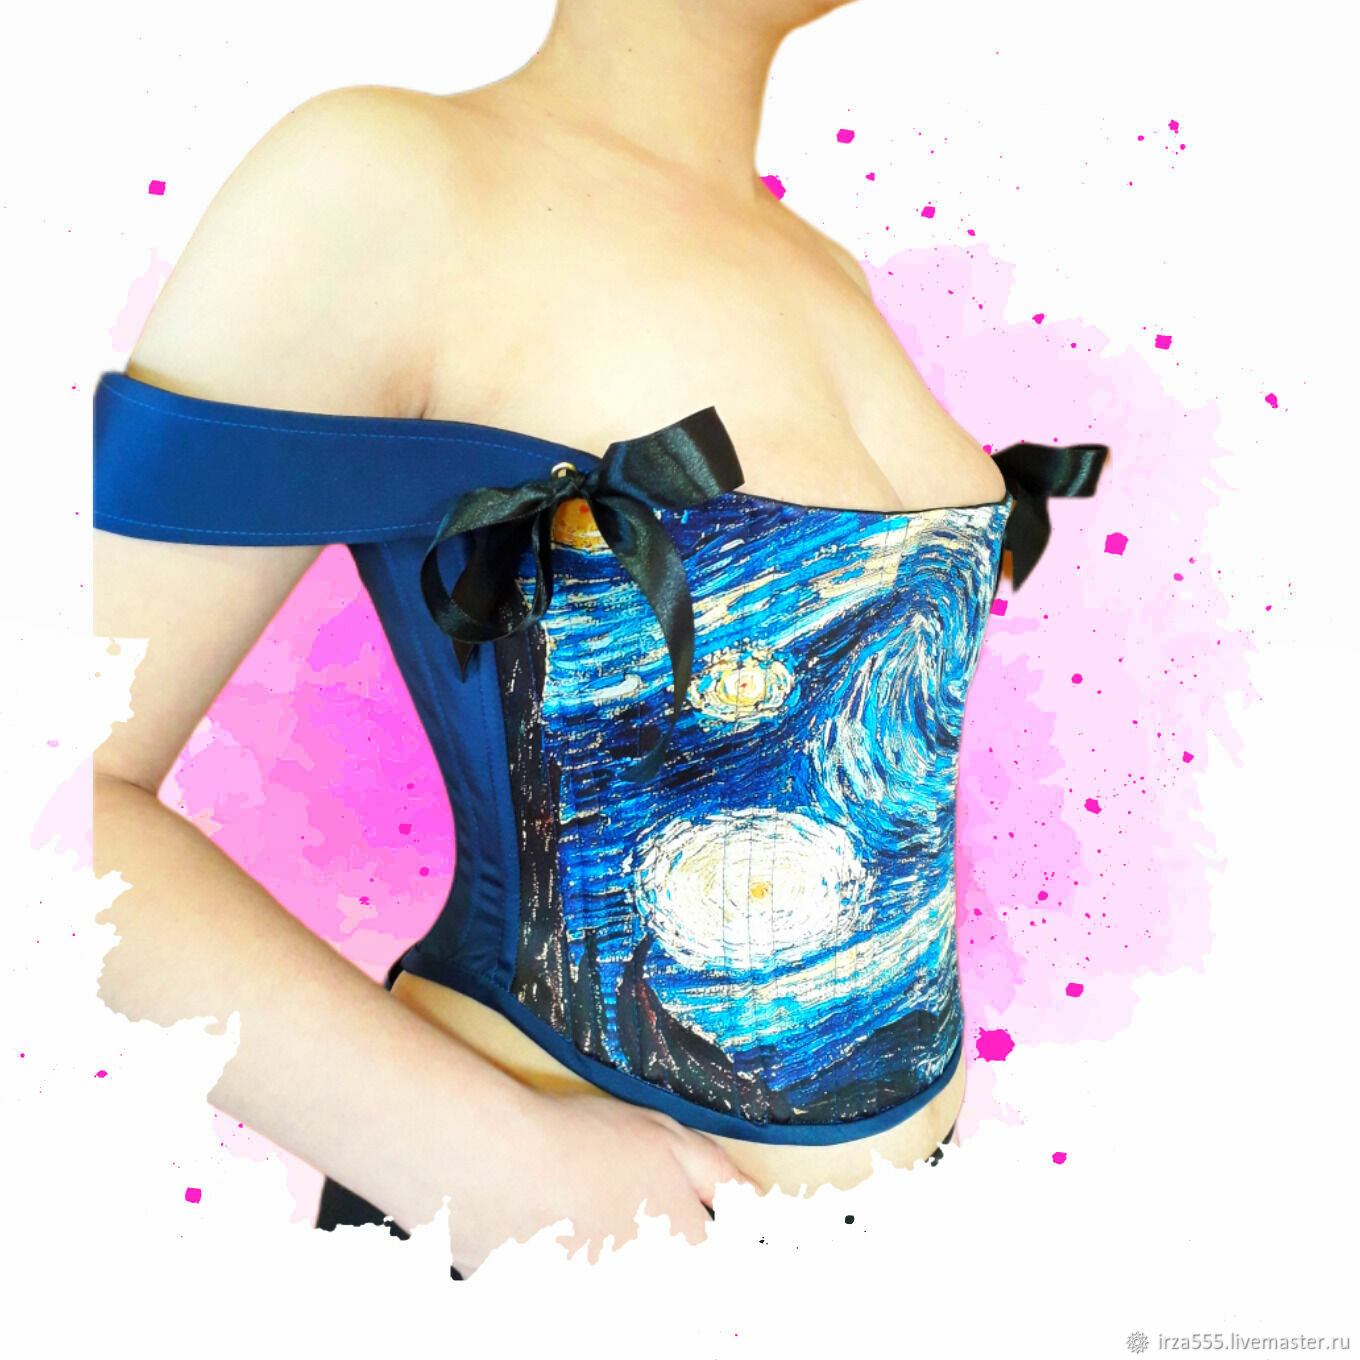 https://cs5.livemaster.ru/storage/31/82/23af14160eb4262eb13afa8801pm--corsets-corsets-corset-push-up-starry-sky-with-a-painting-by-.jpg